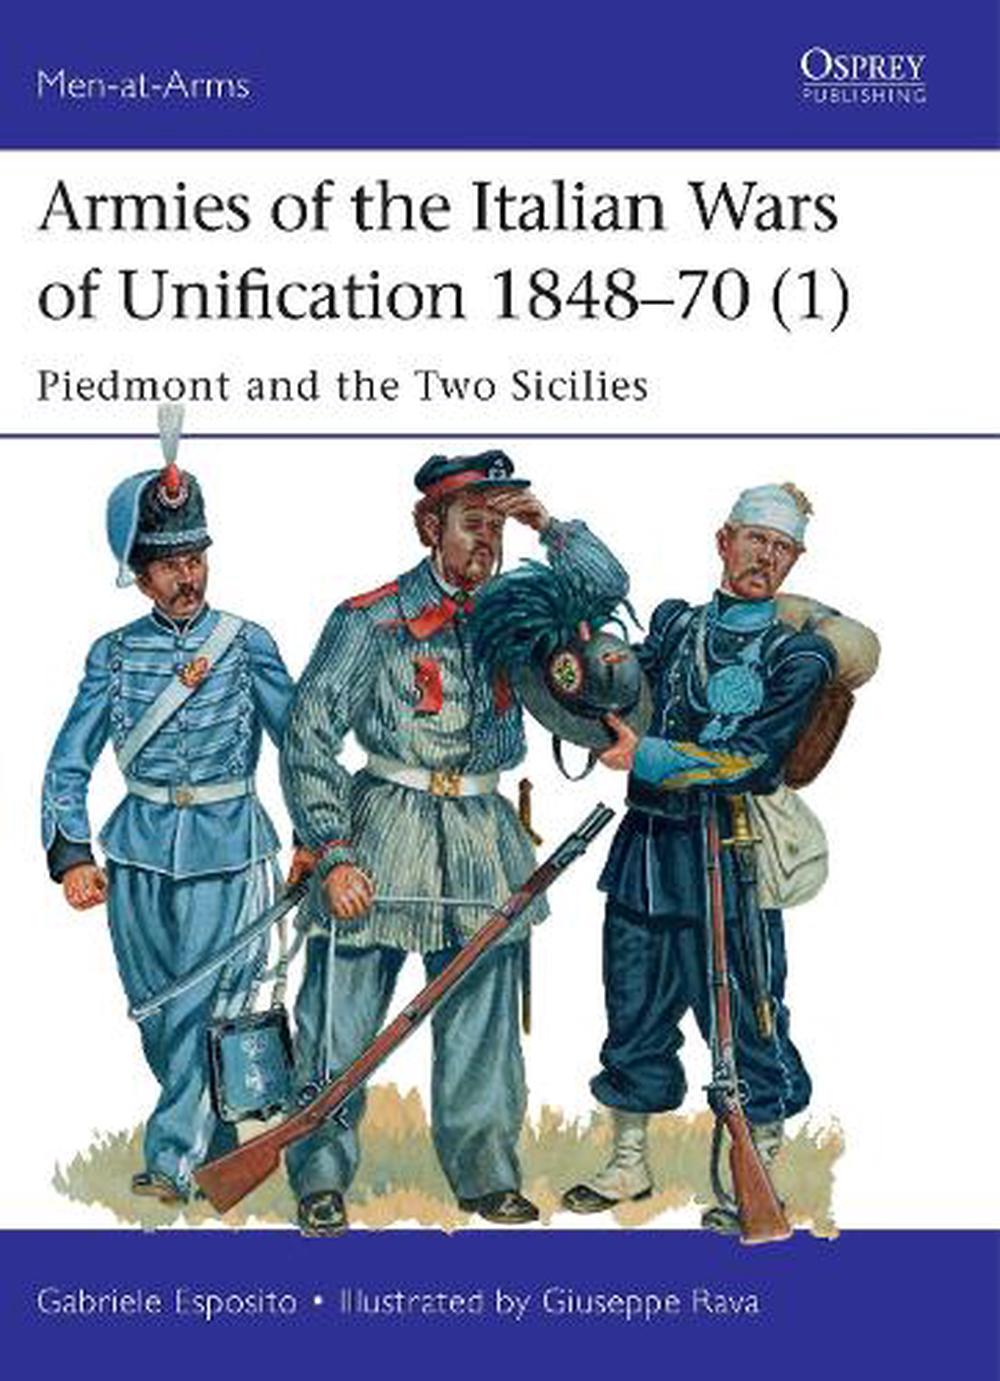 Men at Arms: Armies of the First Carlist War 1833-39 Osprey Books